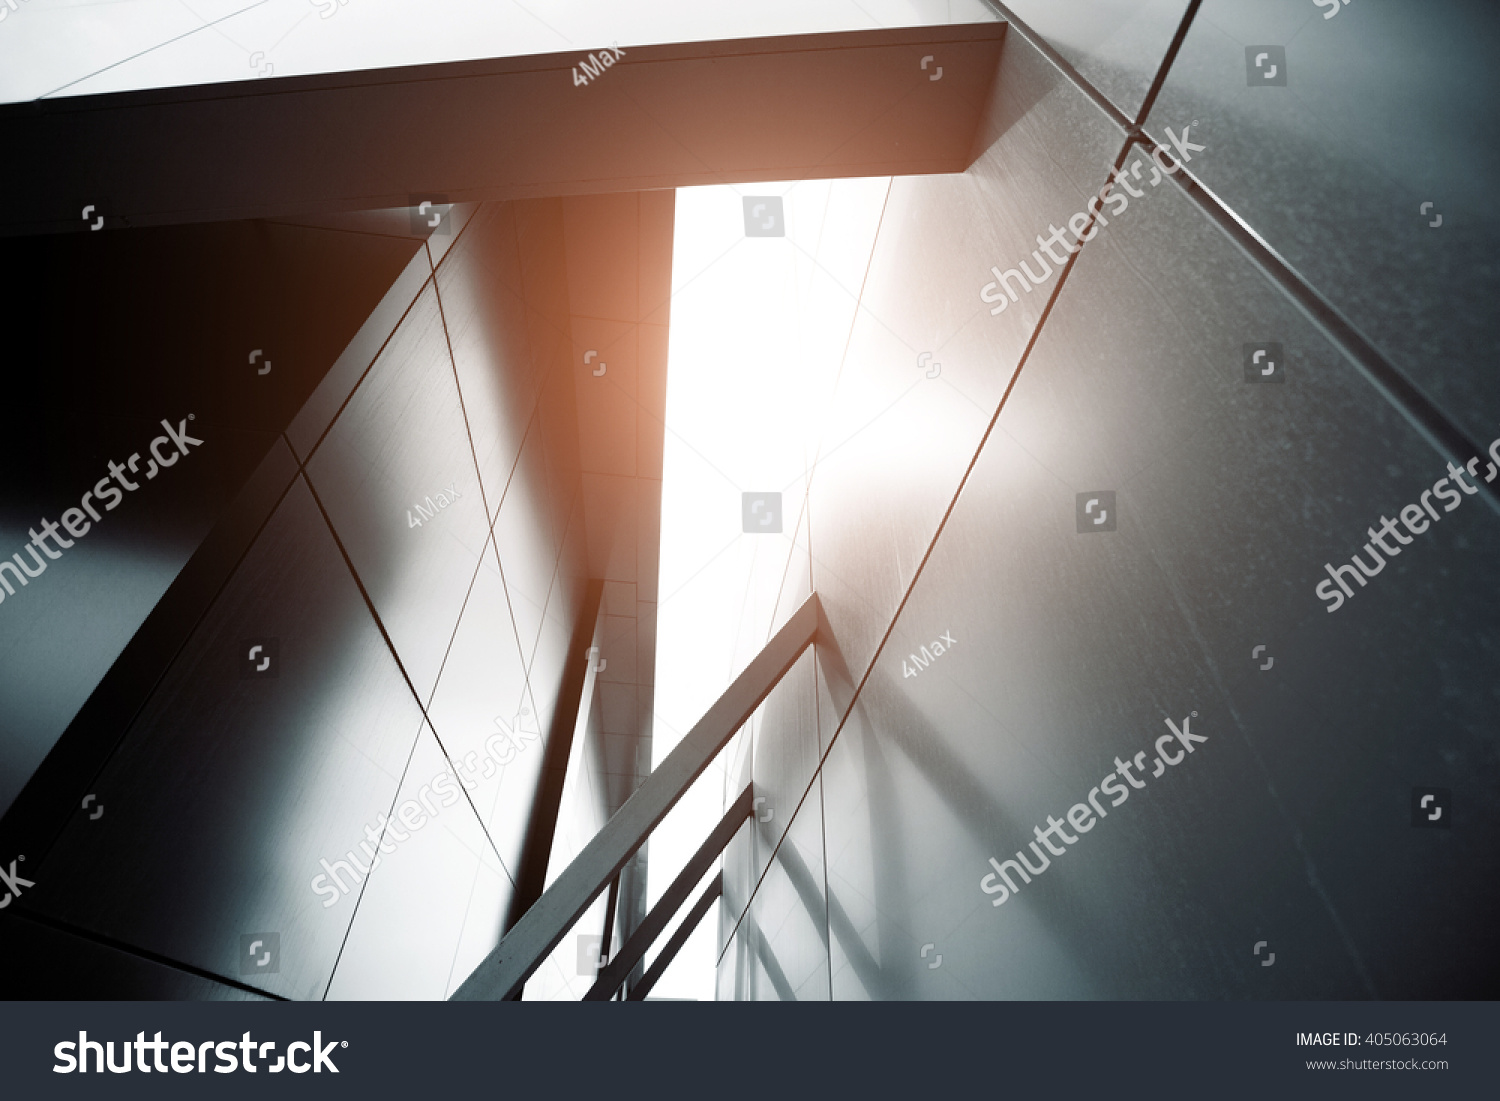 Wide angle abstract background view of steel light blue high rise commercial building skyscraper made of glass exterior. concept of successful industrial architecture and office center building #405063064